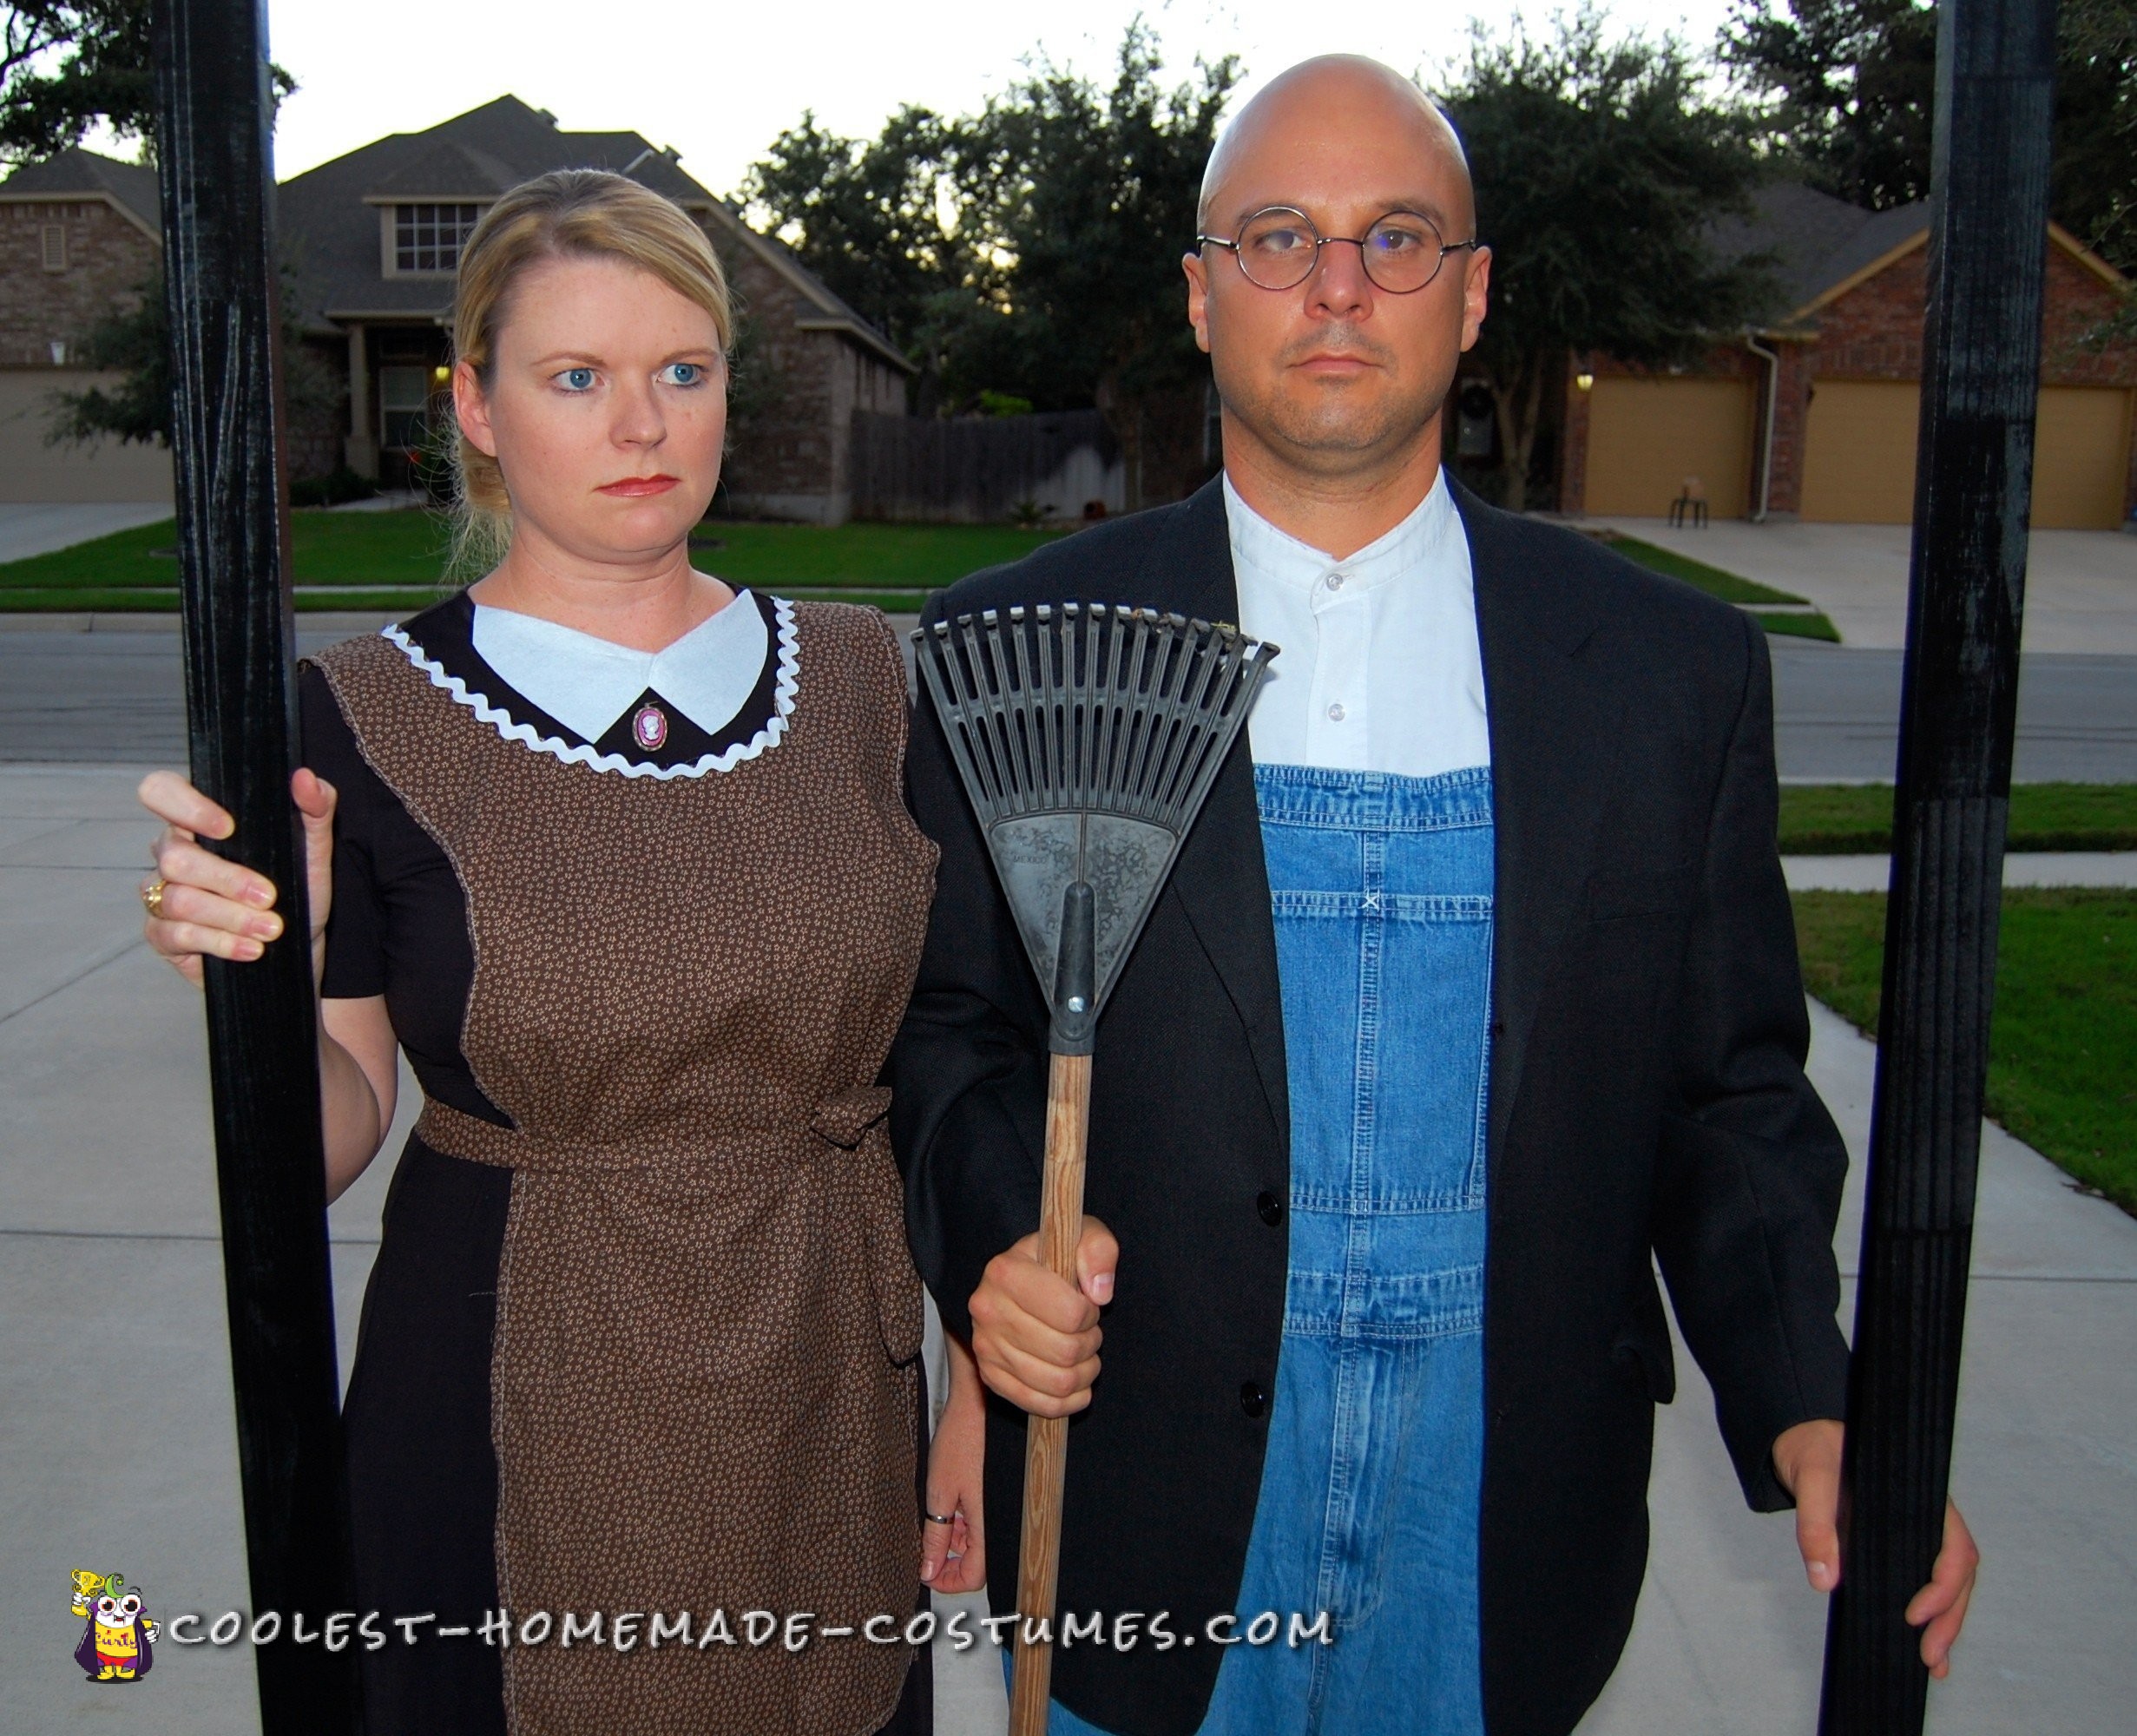 Coolest Homemade American Gothic Costumes